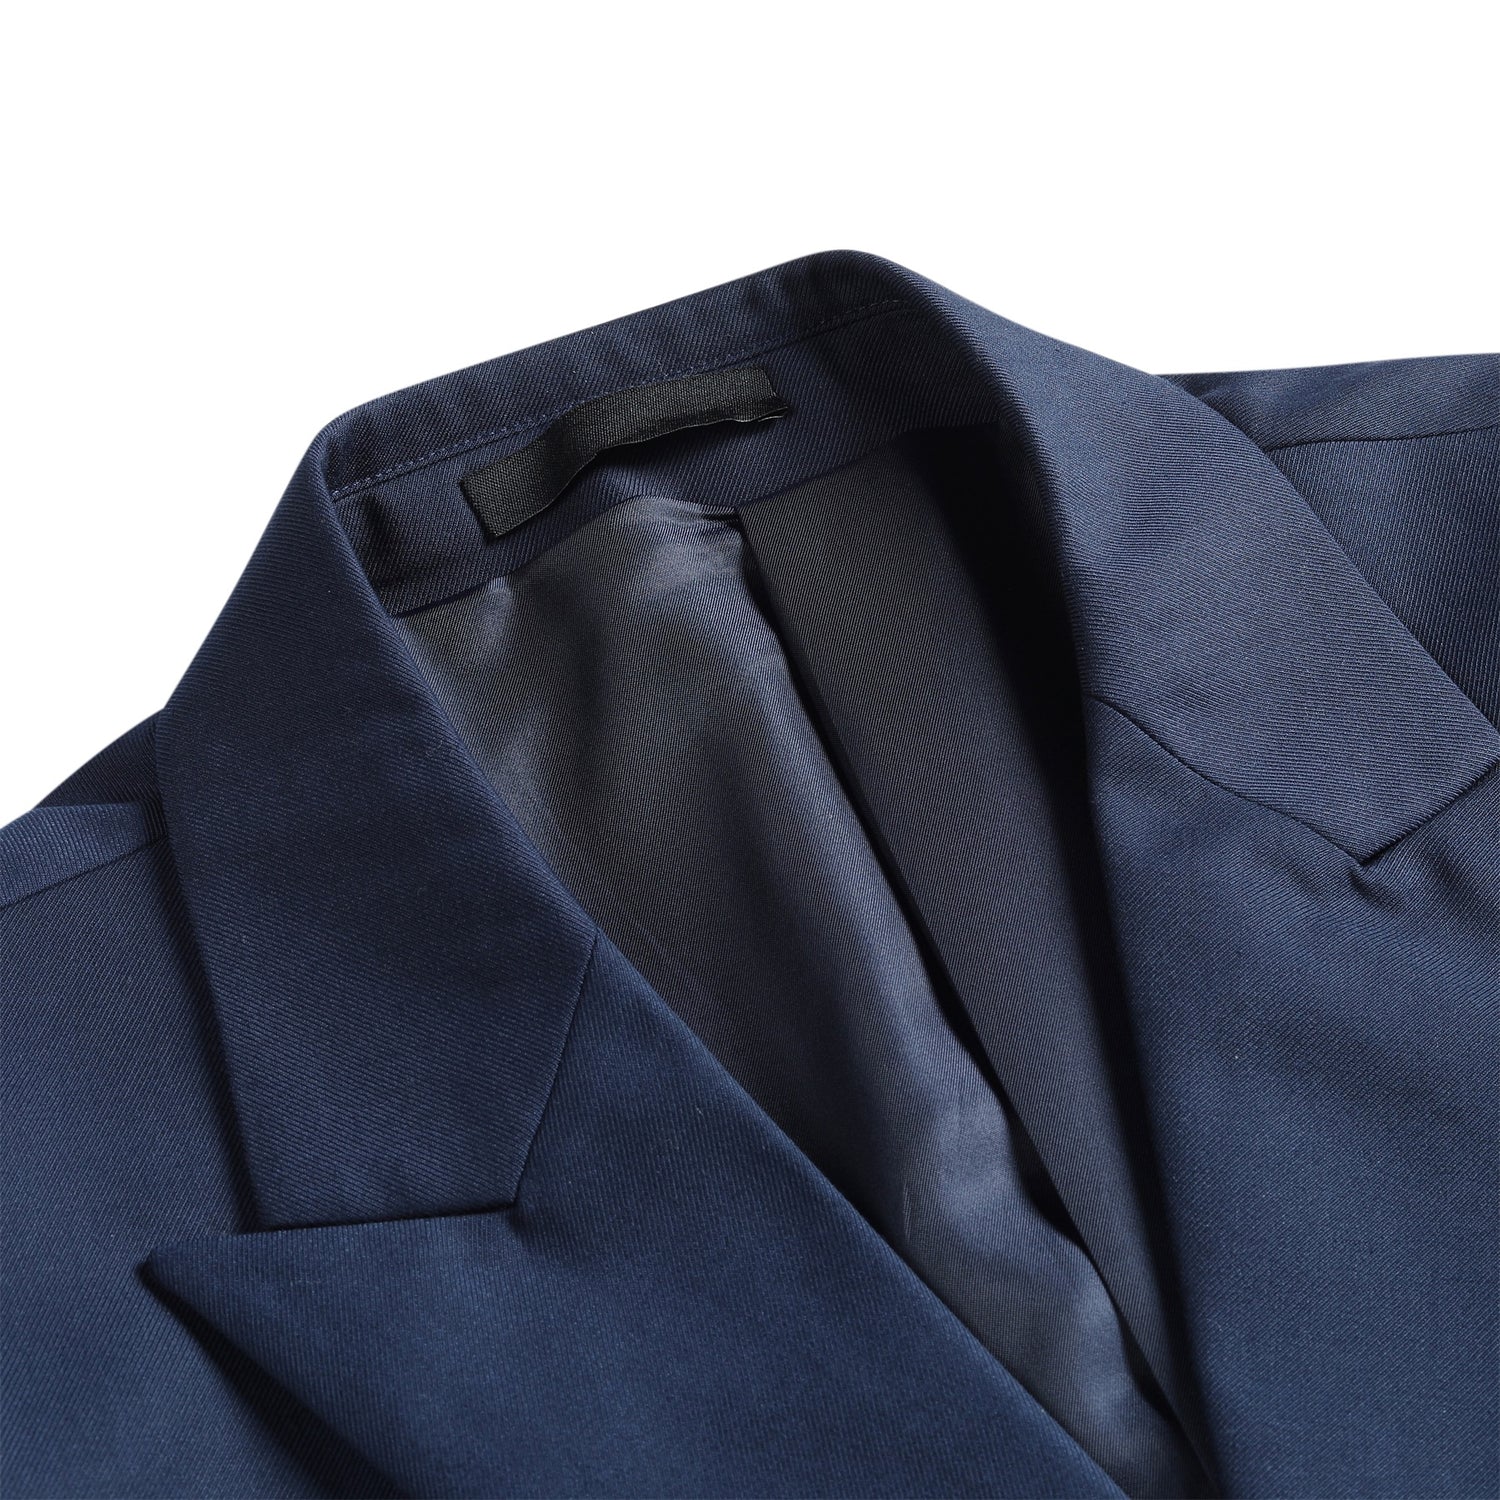 2-Piece Double Breasted Solid Color Navy Suit